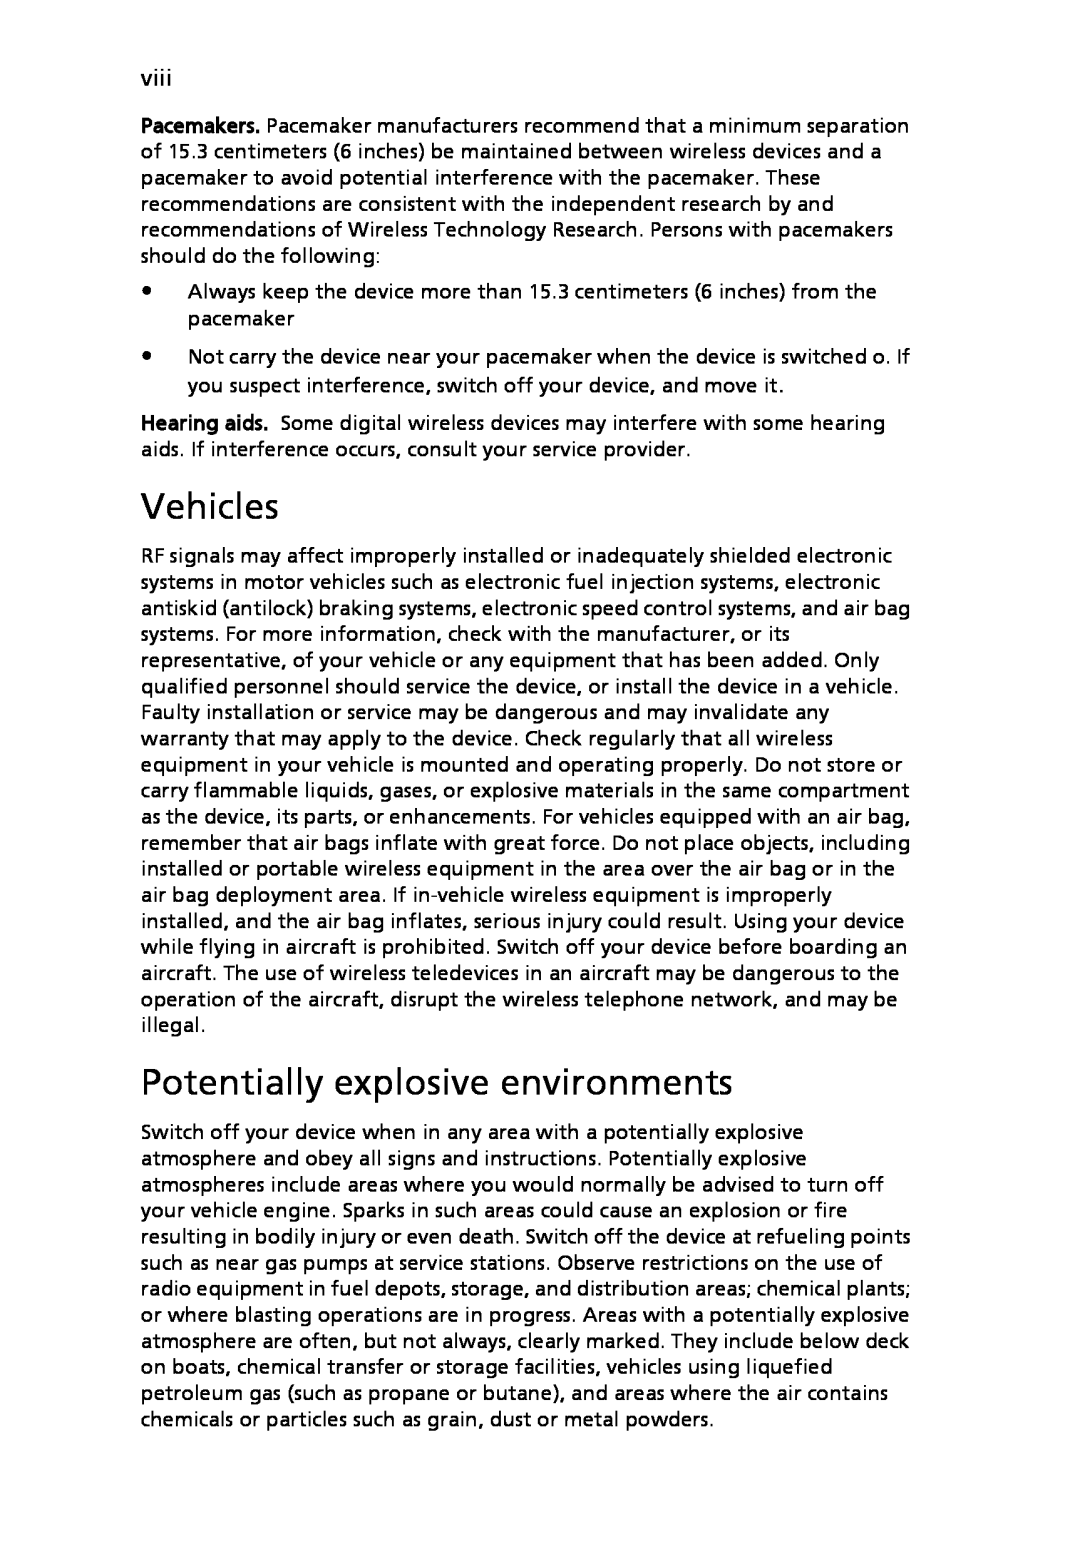 Acer 4920, MS2219 manual Vehicles, Potentially explosive environments 